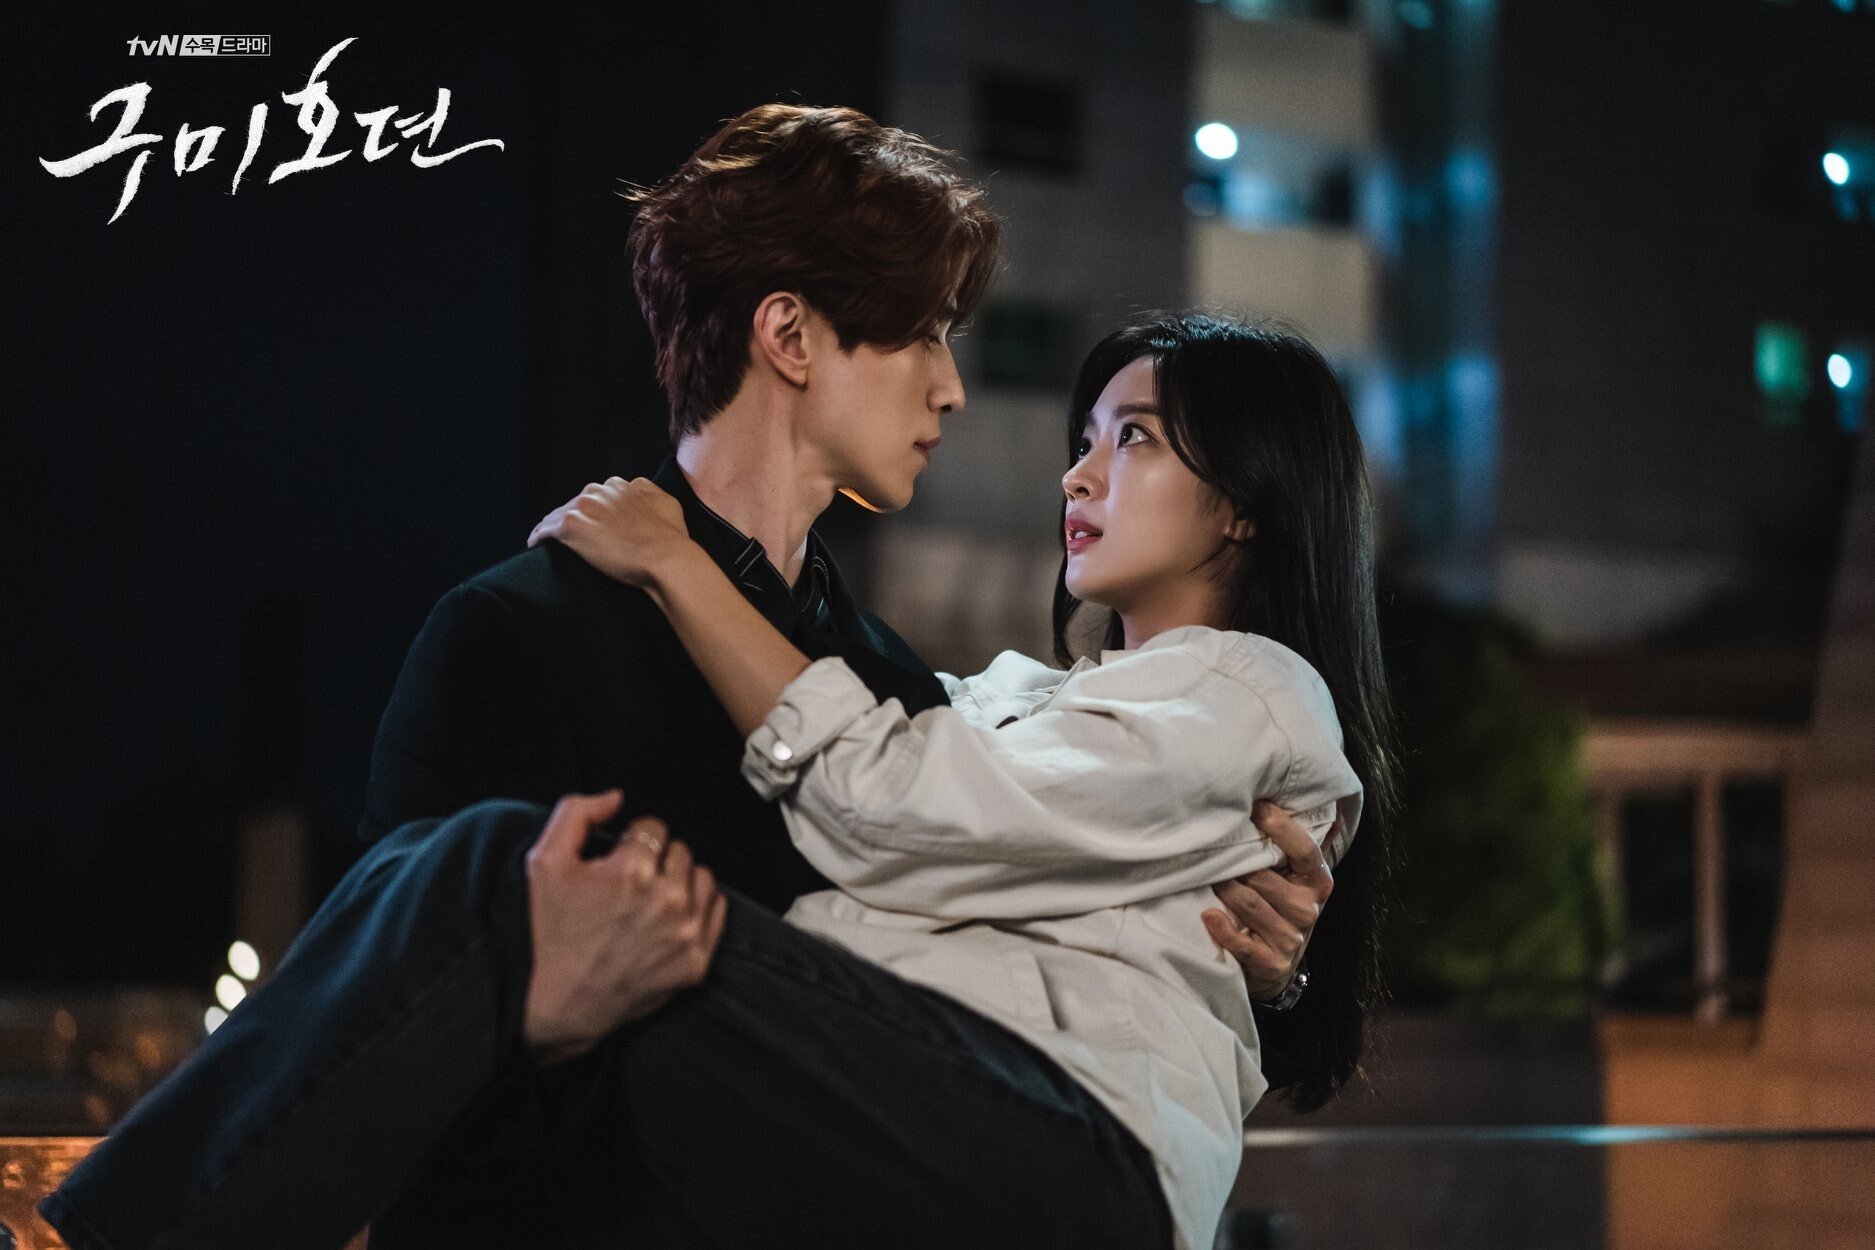 Tale of the Nine Tailed tells the story of nine-tailed fox Lee Yeon and Nam Ji-ah, the television producer who’s determined to track him down. Photo: Kdramadiary